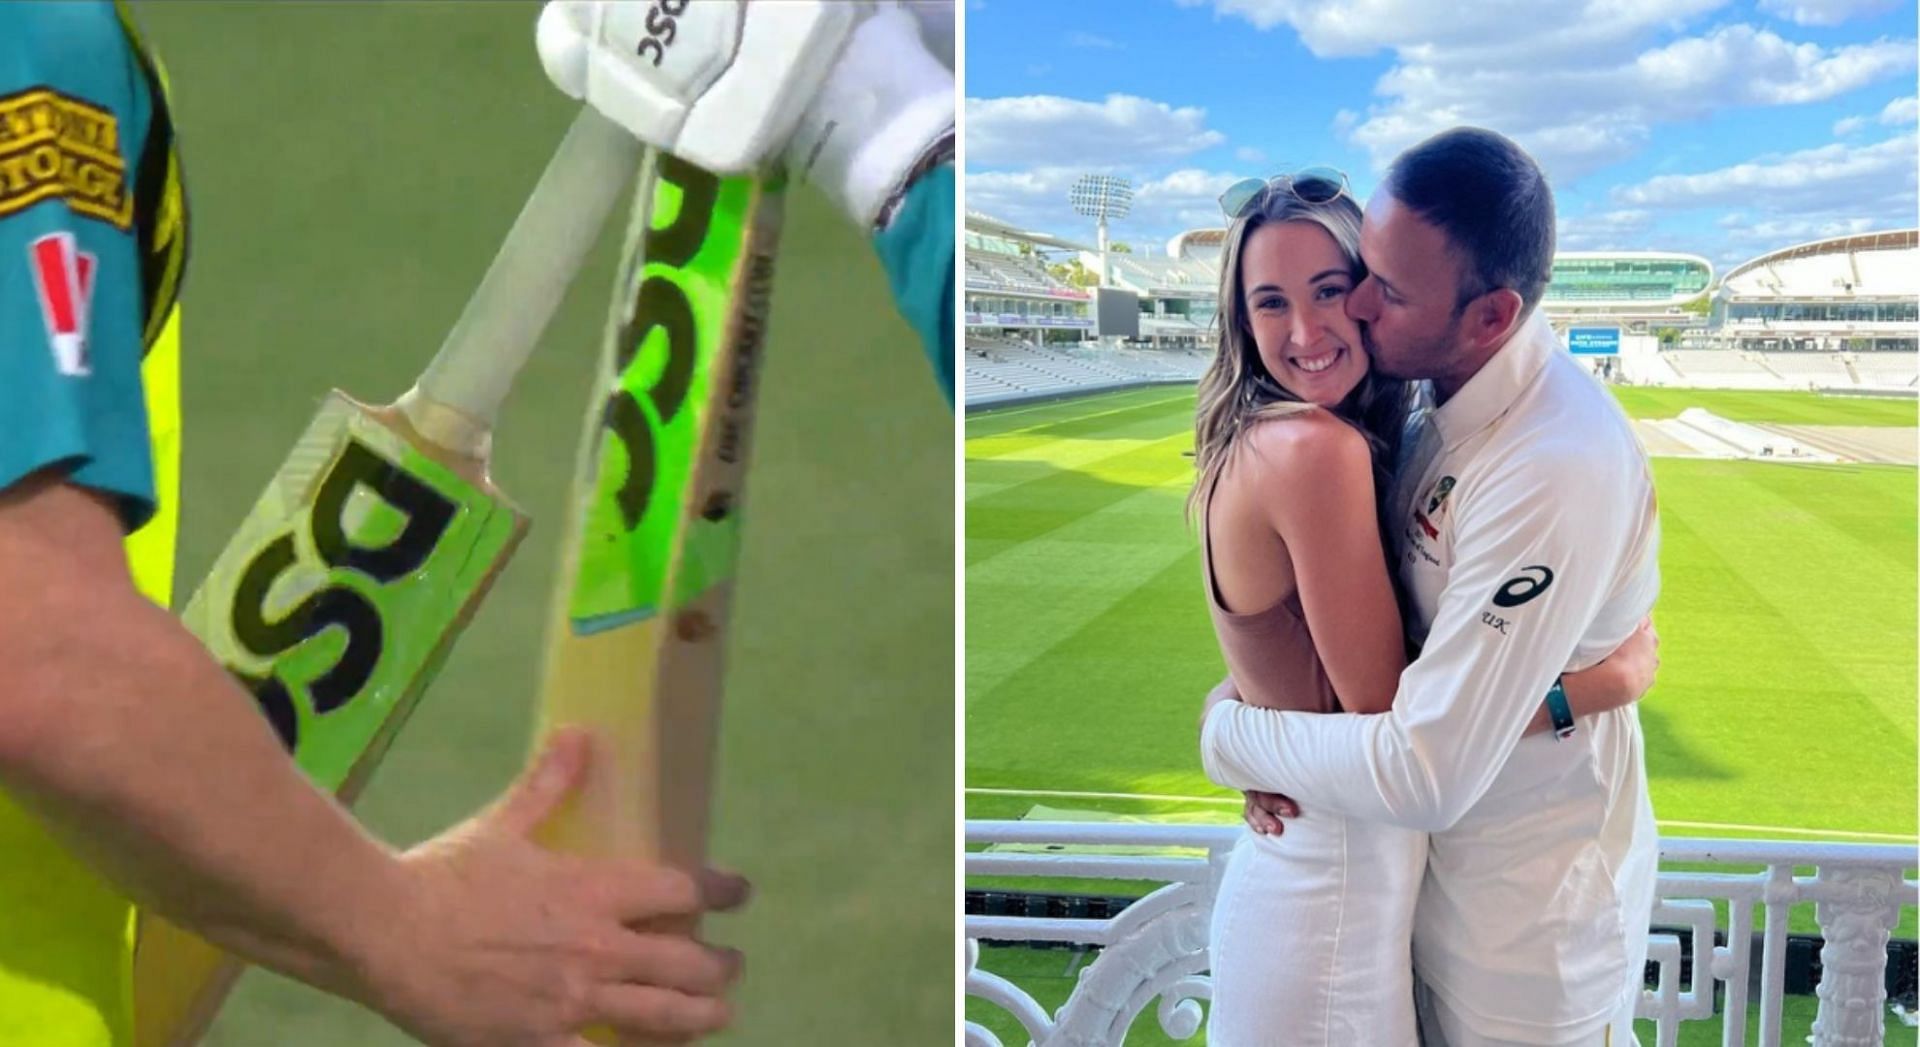 “She is a prepared one” – Usman Khawaja on wife’s golden advice to carry extra bat as handle gets broken during a BBL game